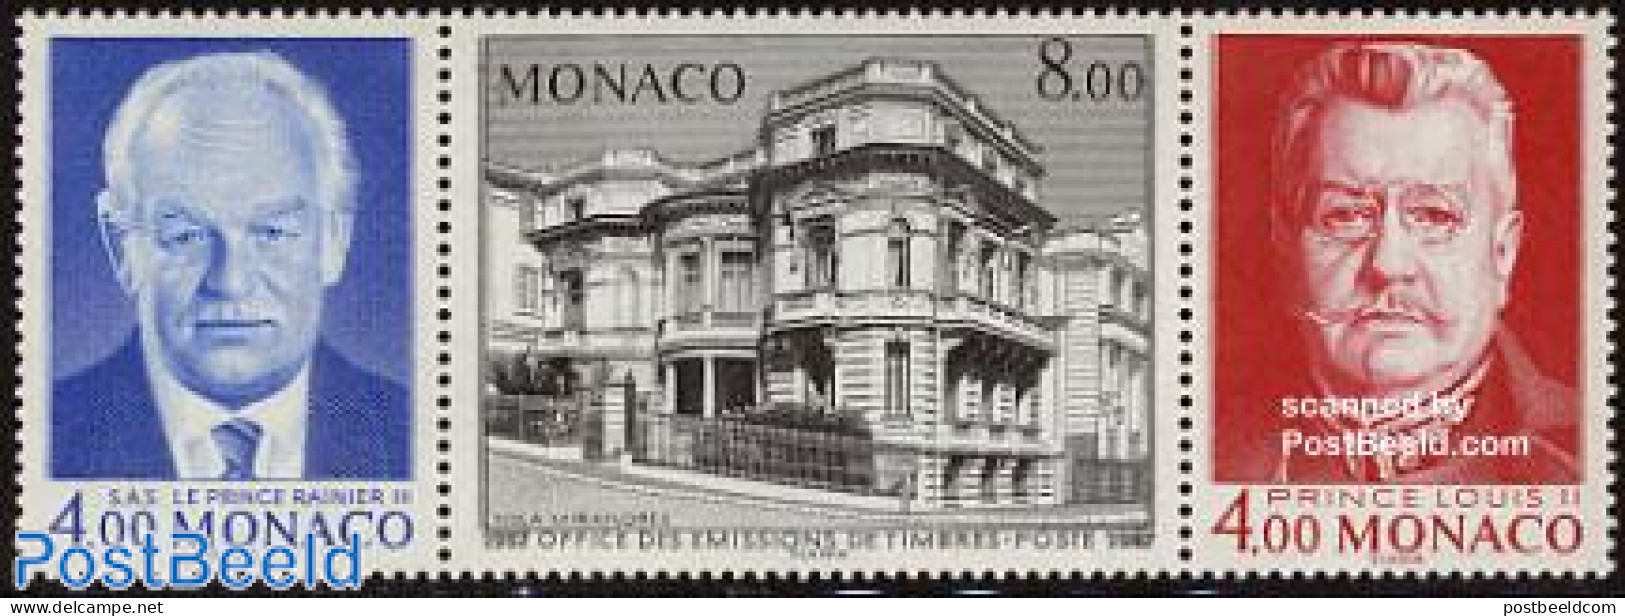 Monaco 1987 Stamp Bureau 3v [::], Mint NH, History - Kings & Queens (Royalty) - Philately - Art - Architecture - Unused Stamps